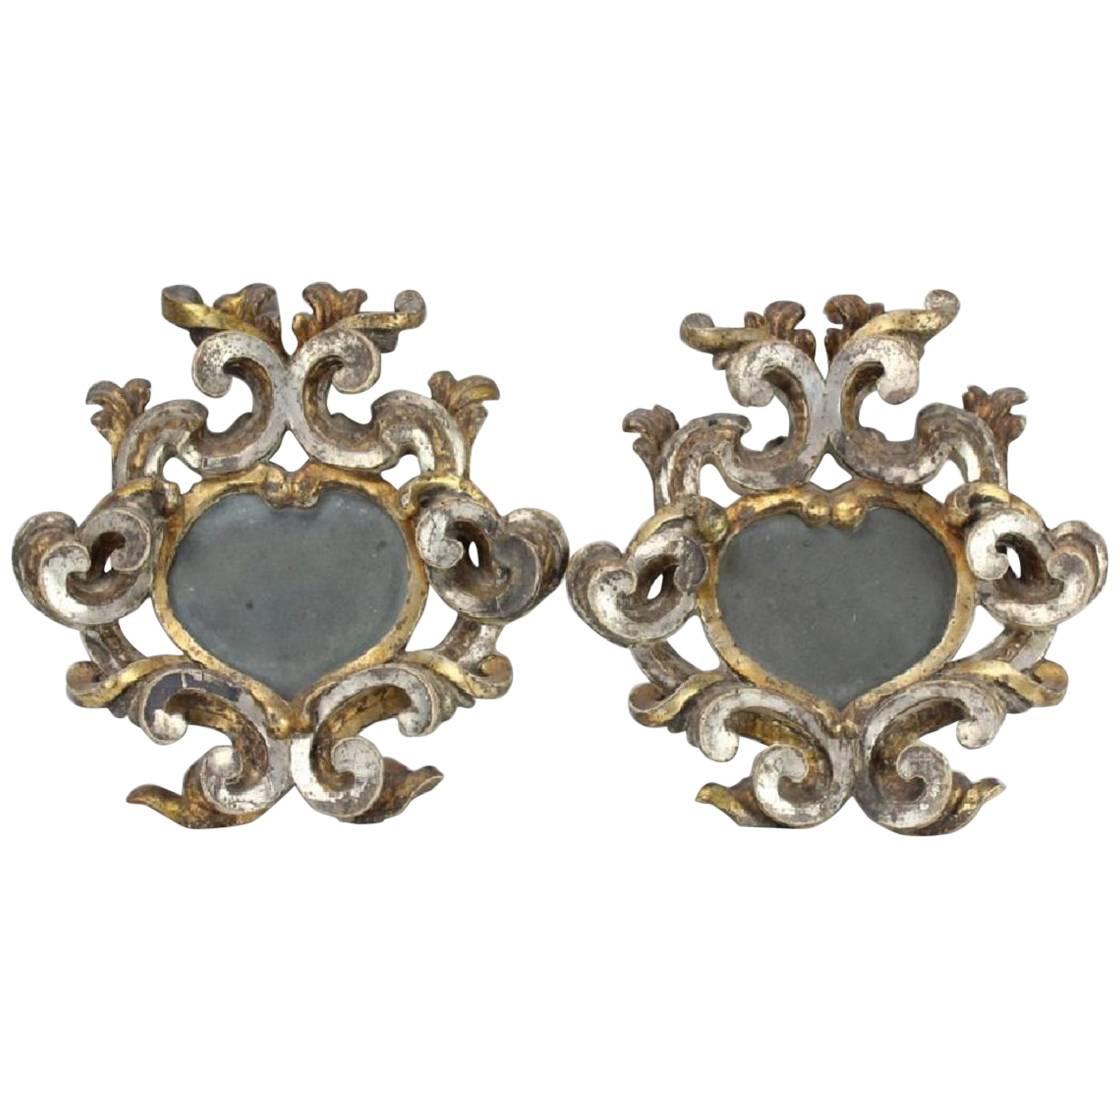 Pair of Italian Silver and Gold Heart Shaped 18th Century Mirrors